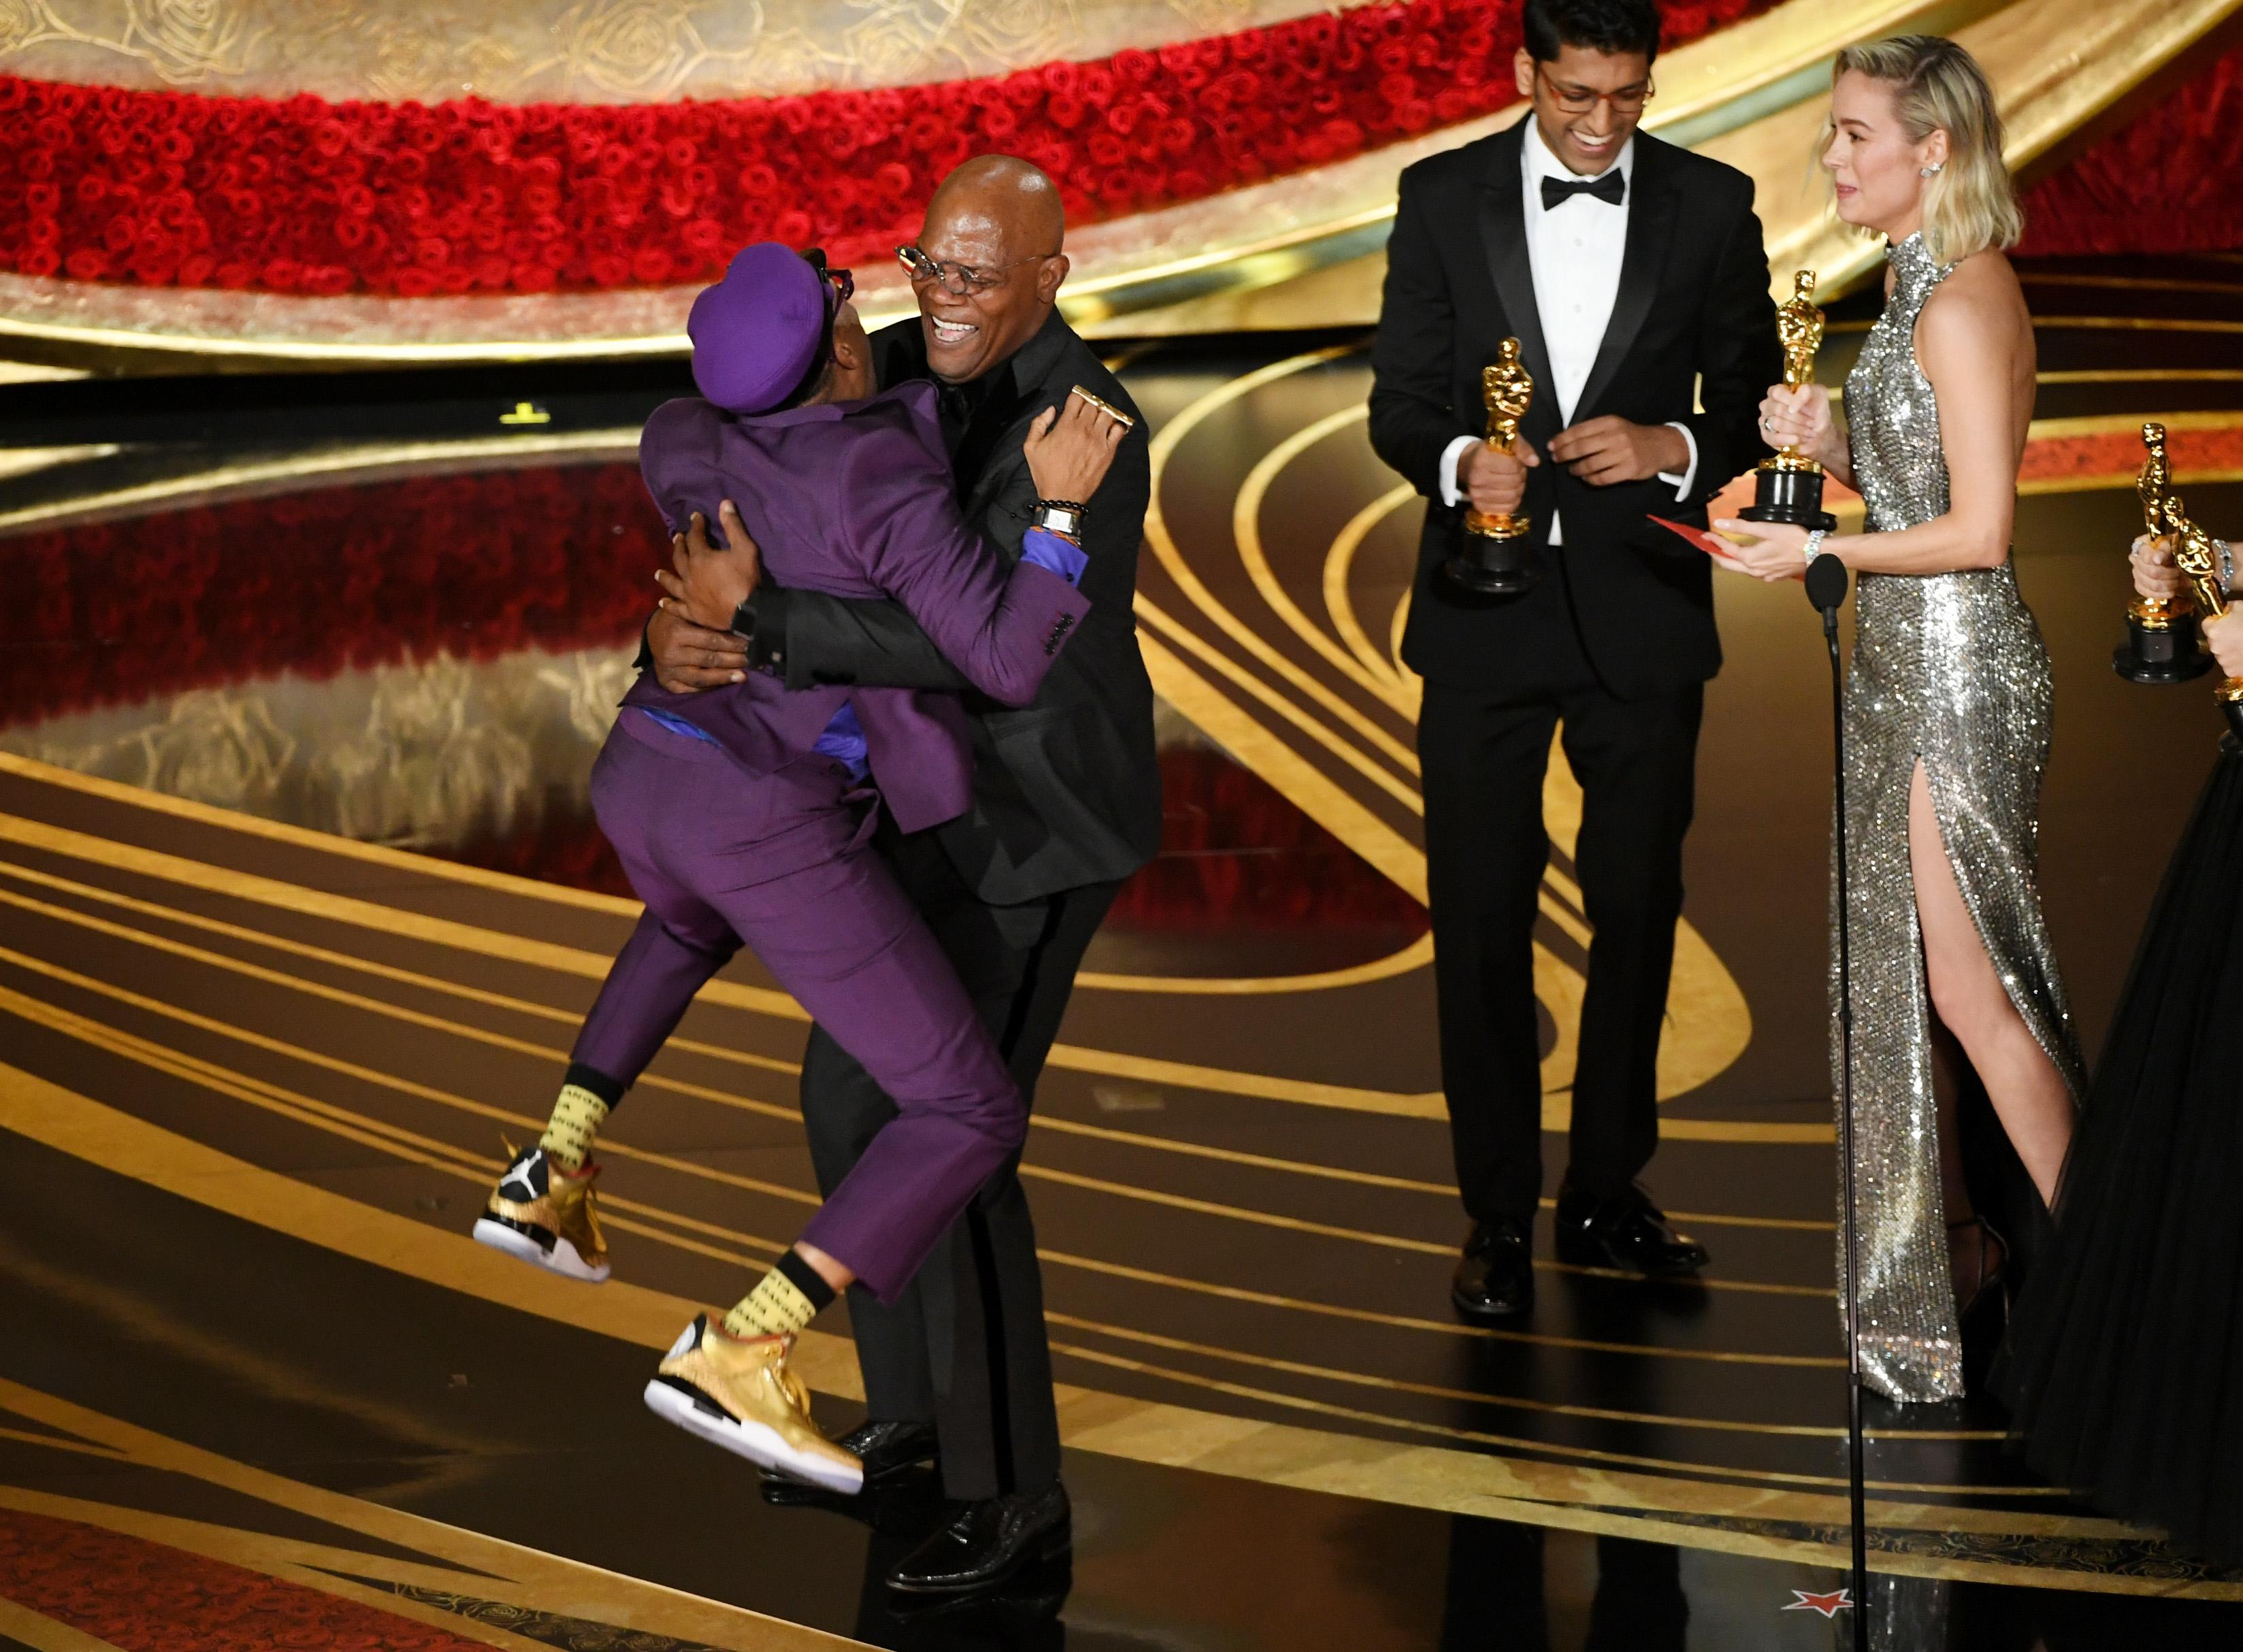 Spike Lee's Oscar acceptance speech included political message, dance moves.